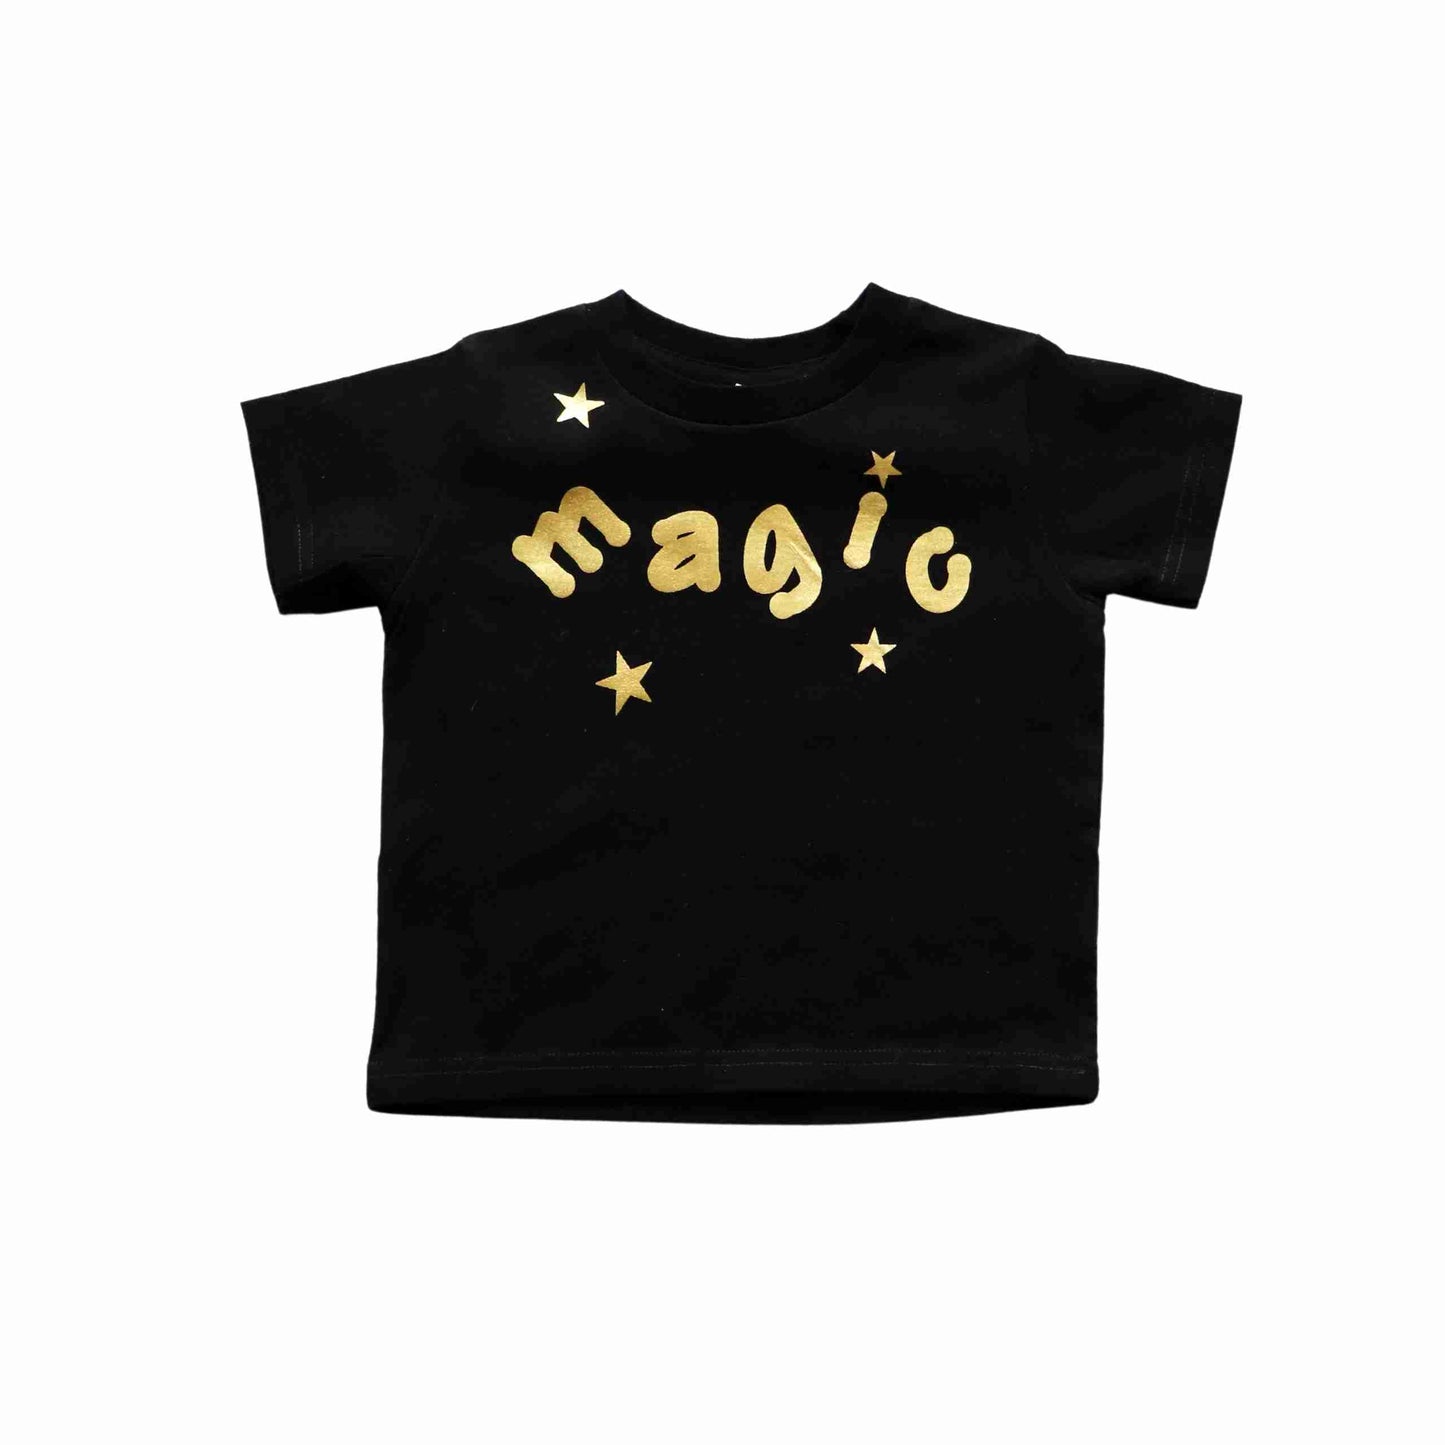 a black t - shirt with gold letters and stars